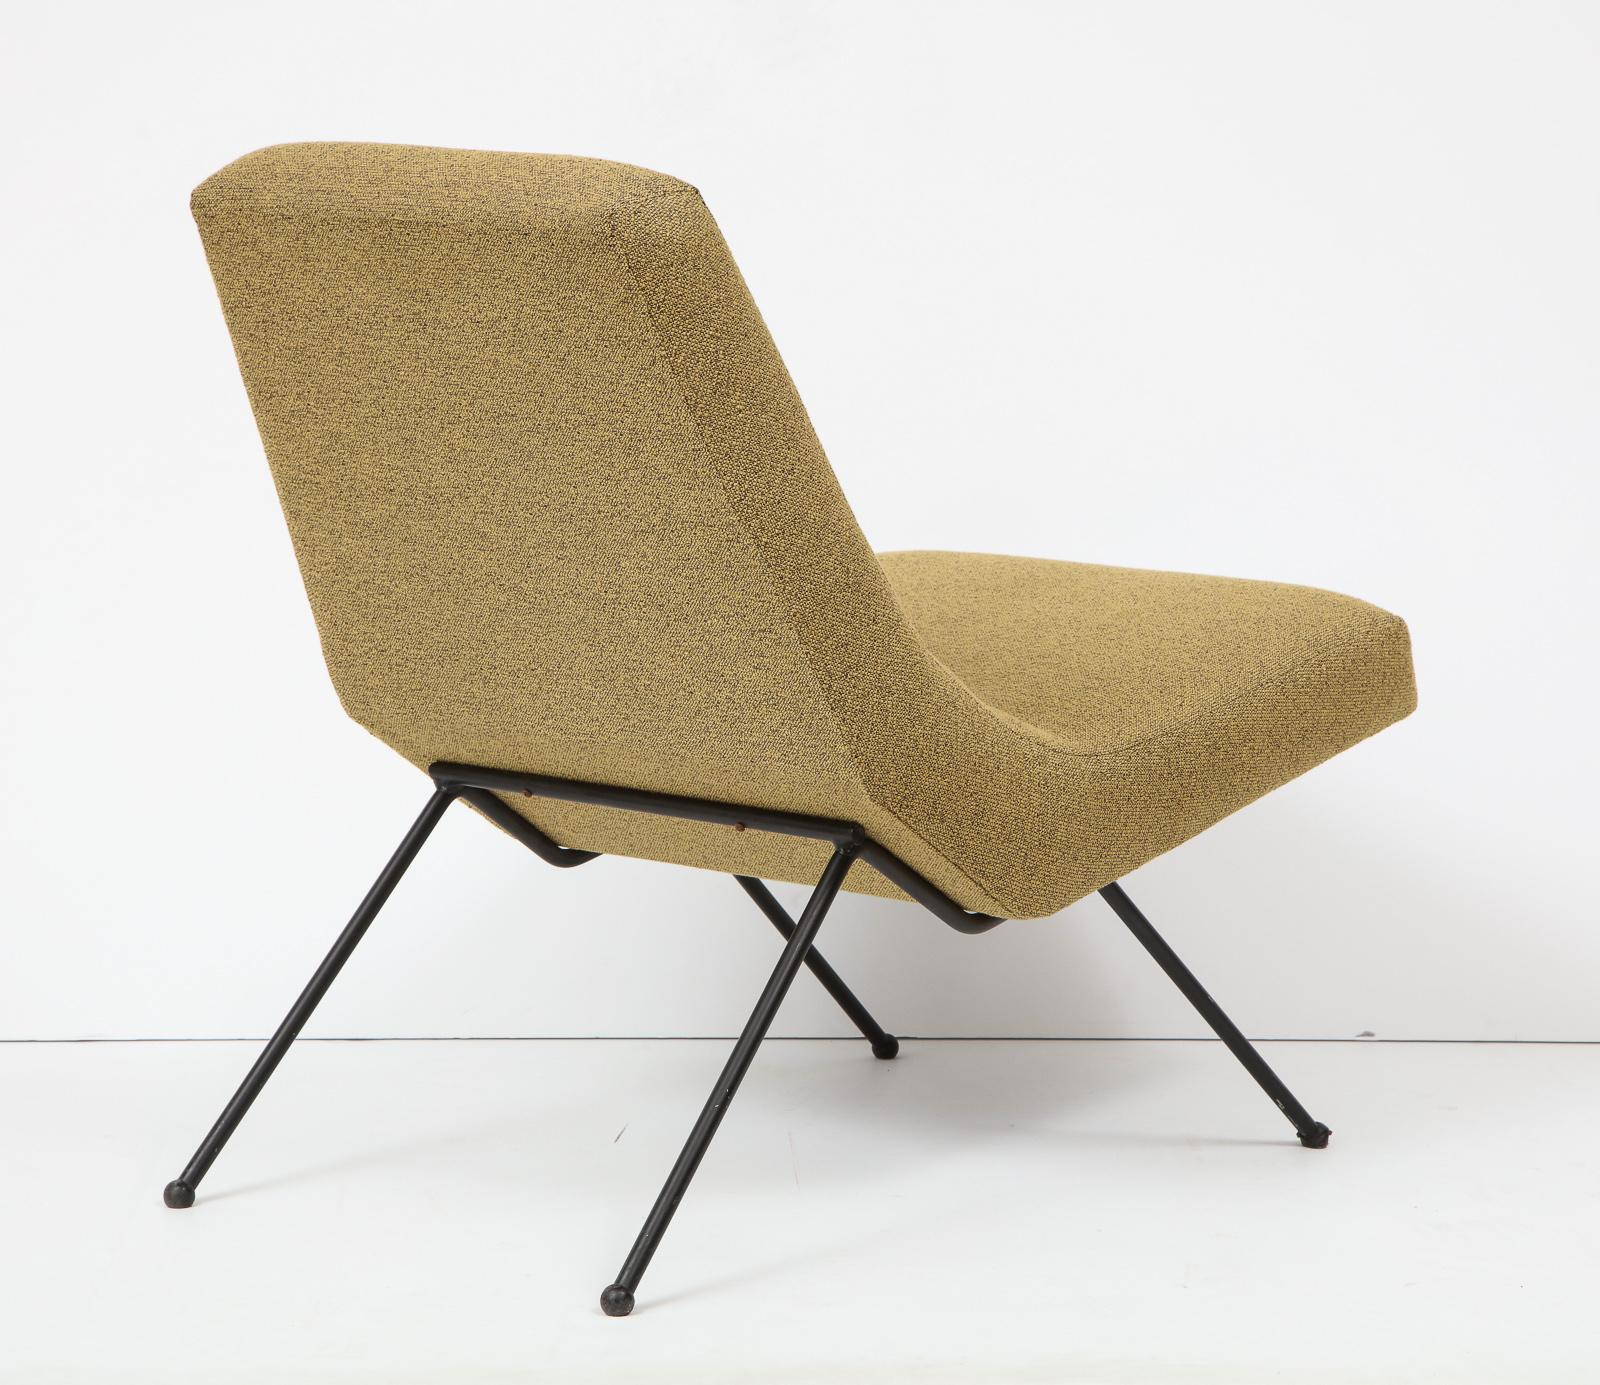 Enameled Sculptural Adrian Pearsall Lounge Chair for Craft Associates